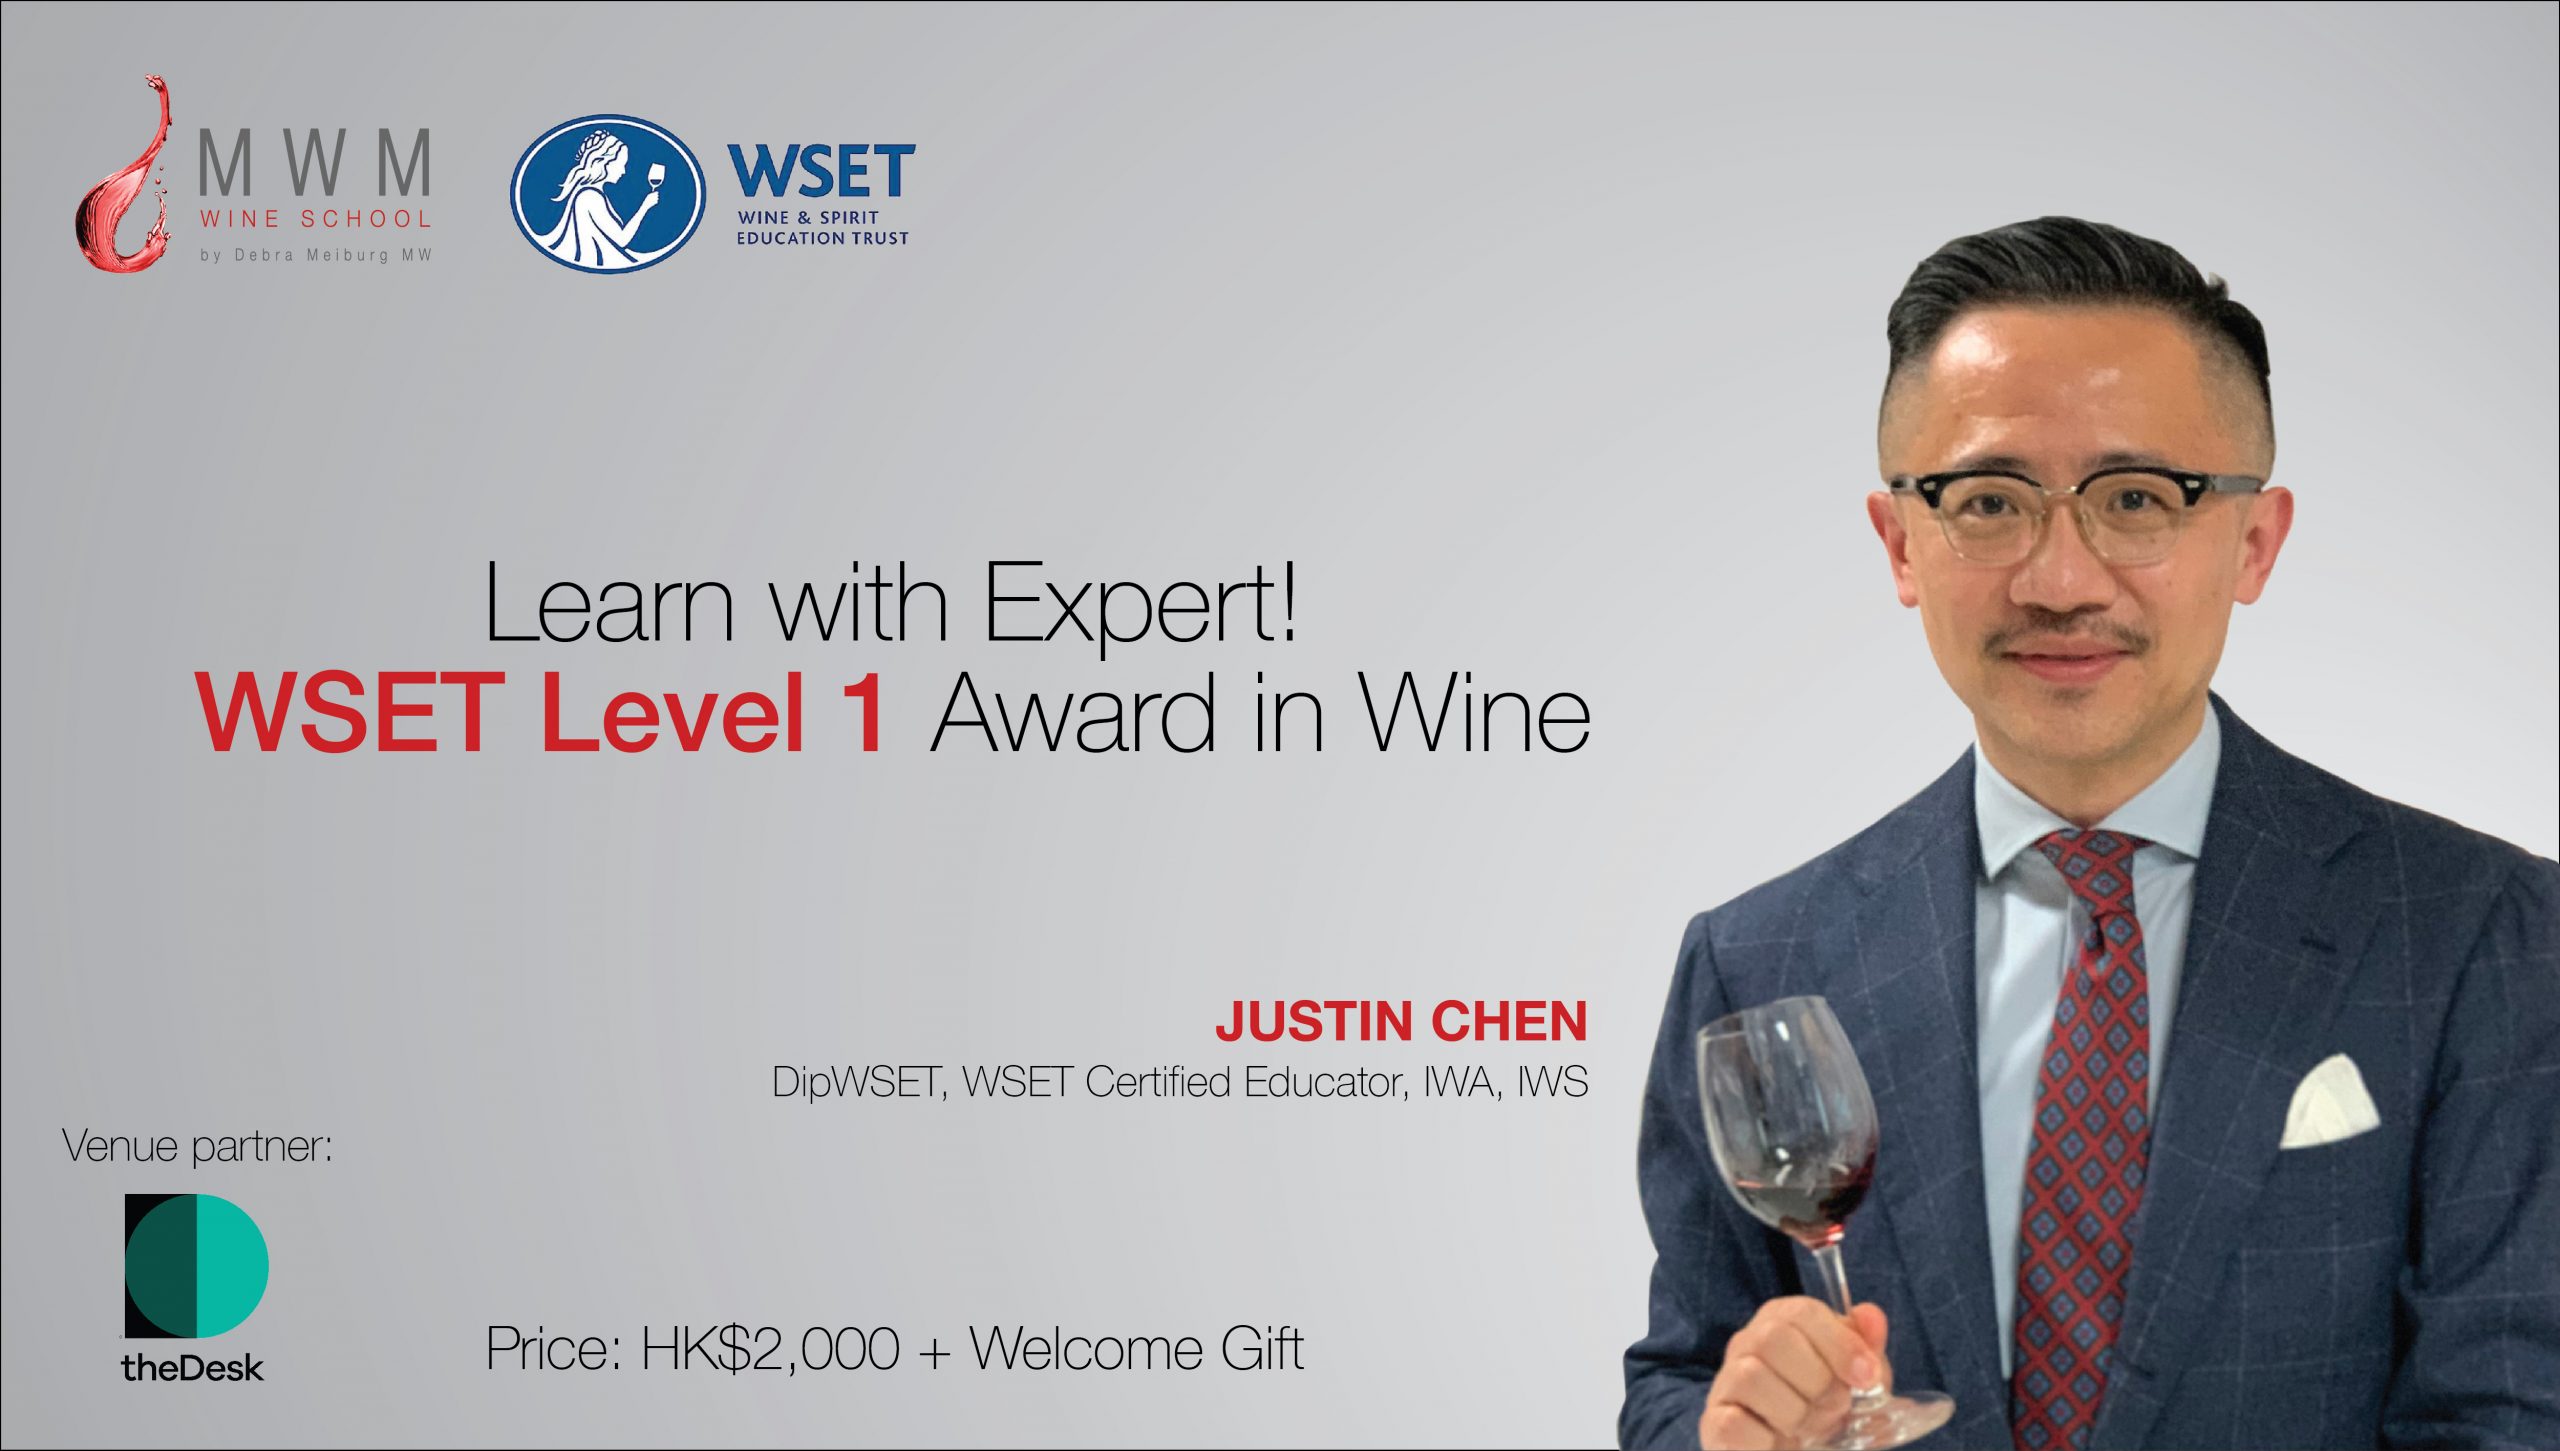 WSET Level 1 Award in Wines by Justin Chen and MWM Wine School at the Desk